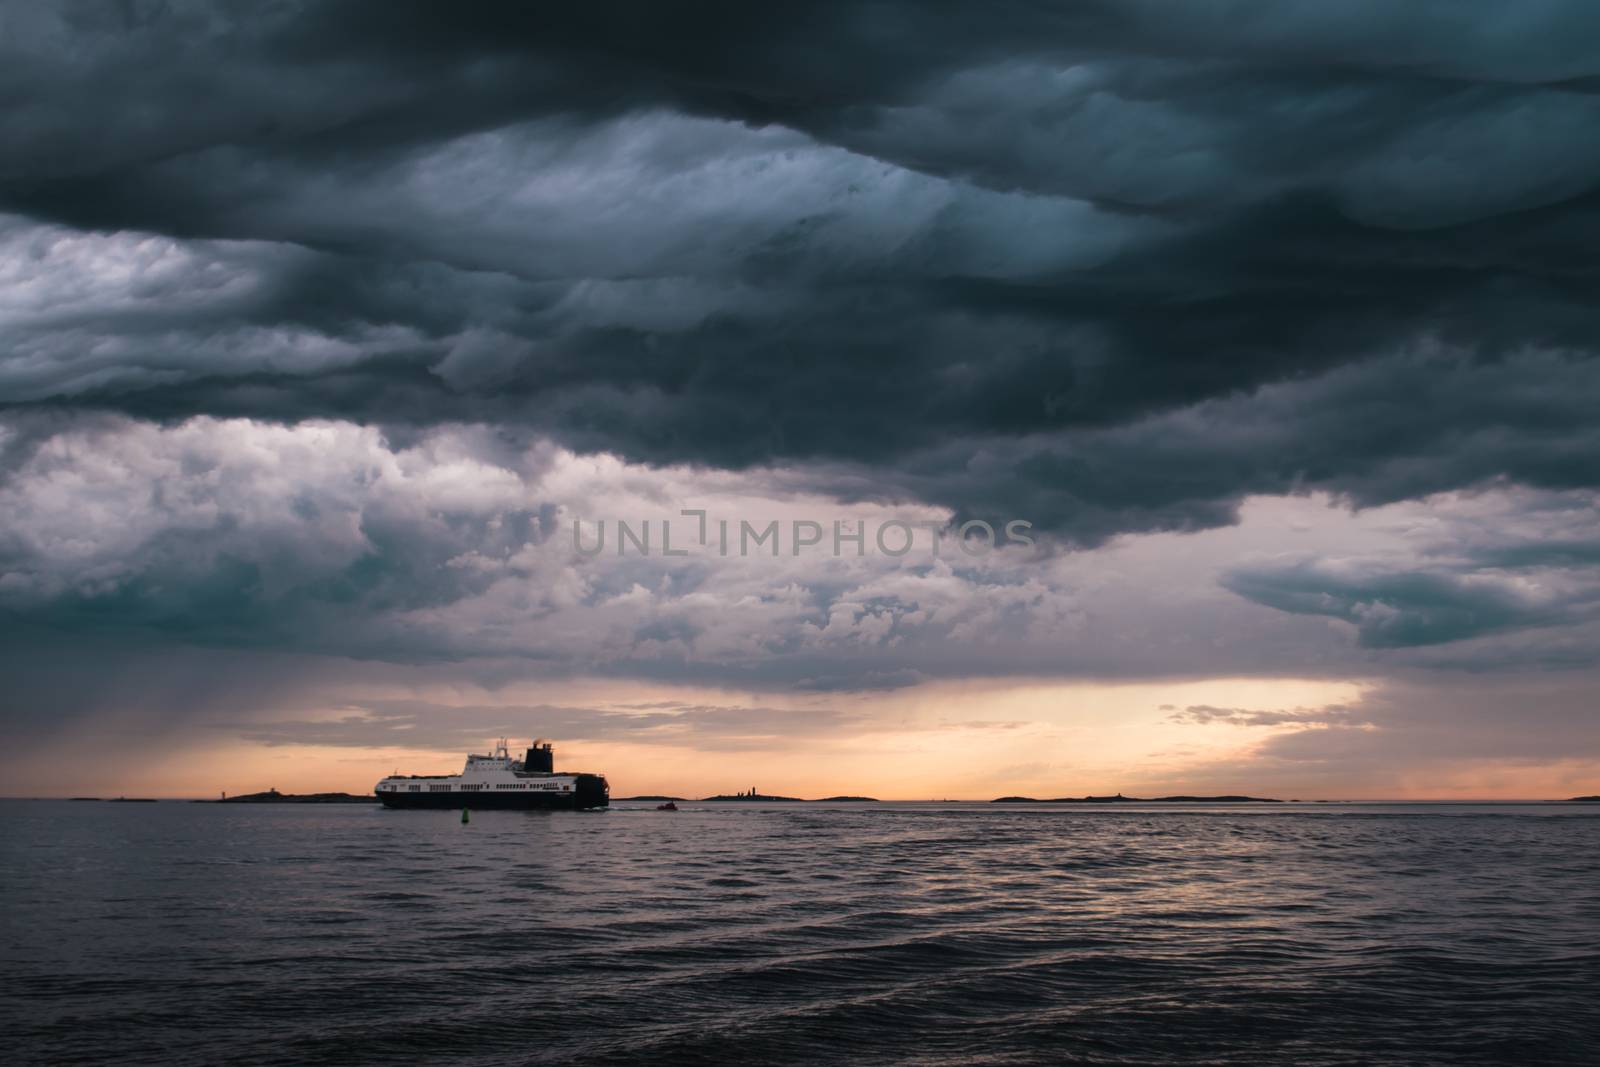 A cargo ship underneath stormy clouds by arvidnorberg